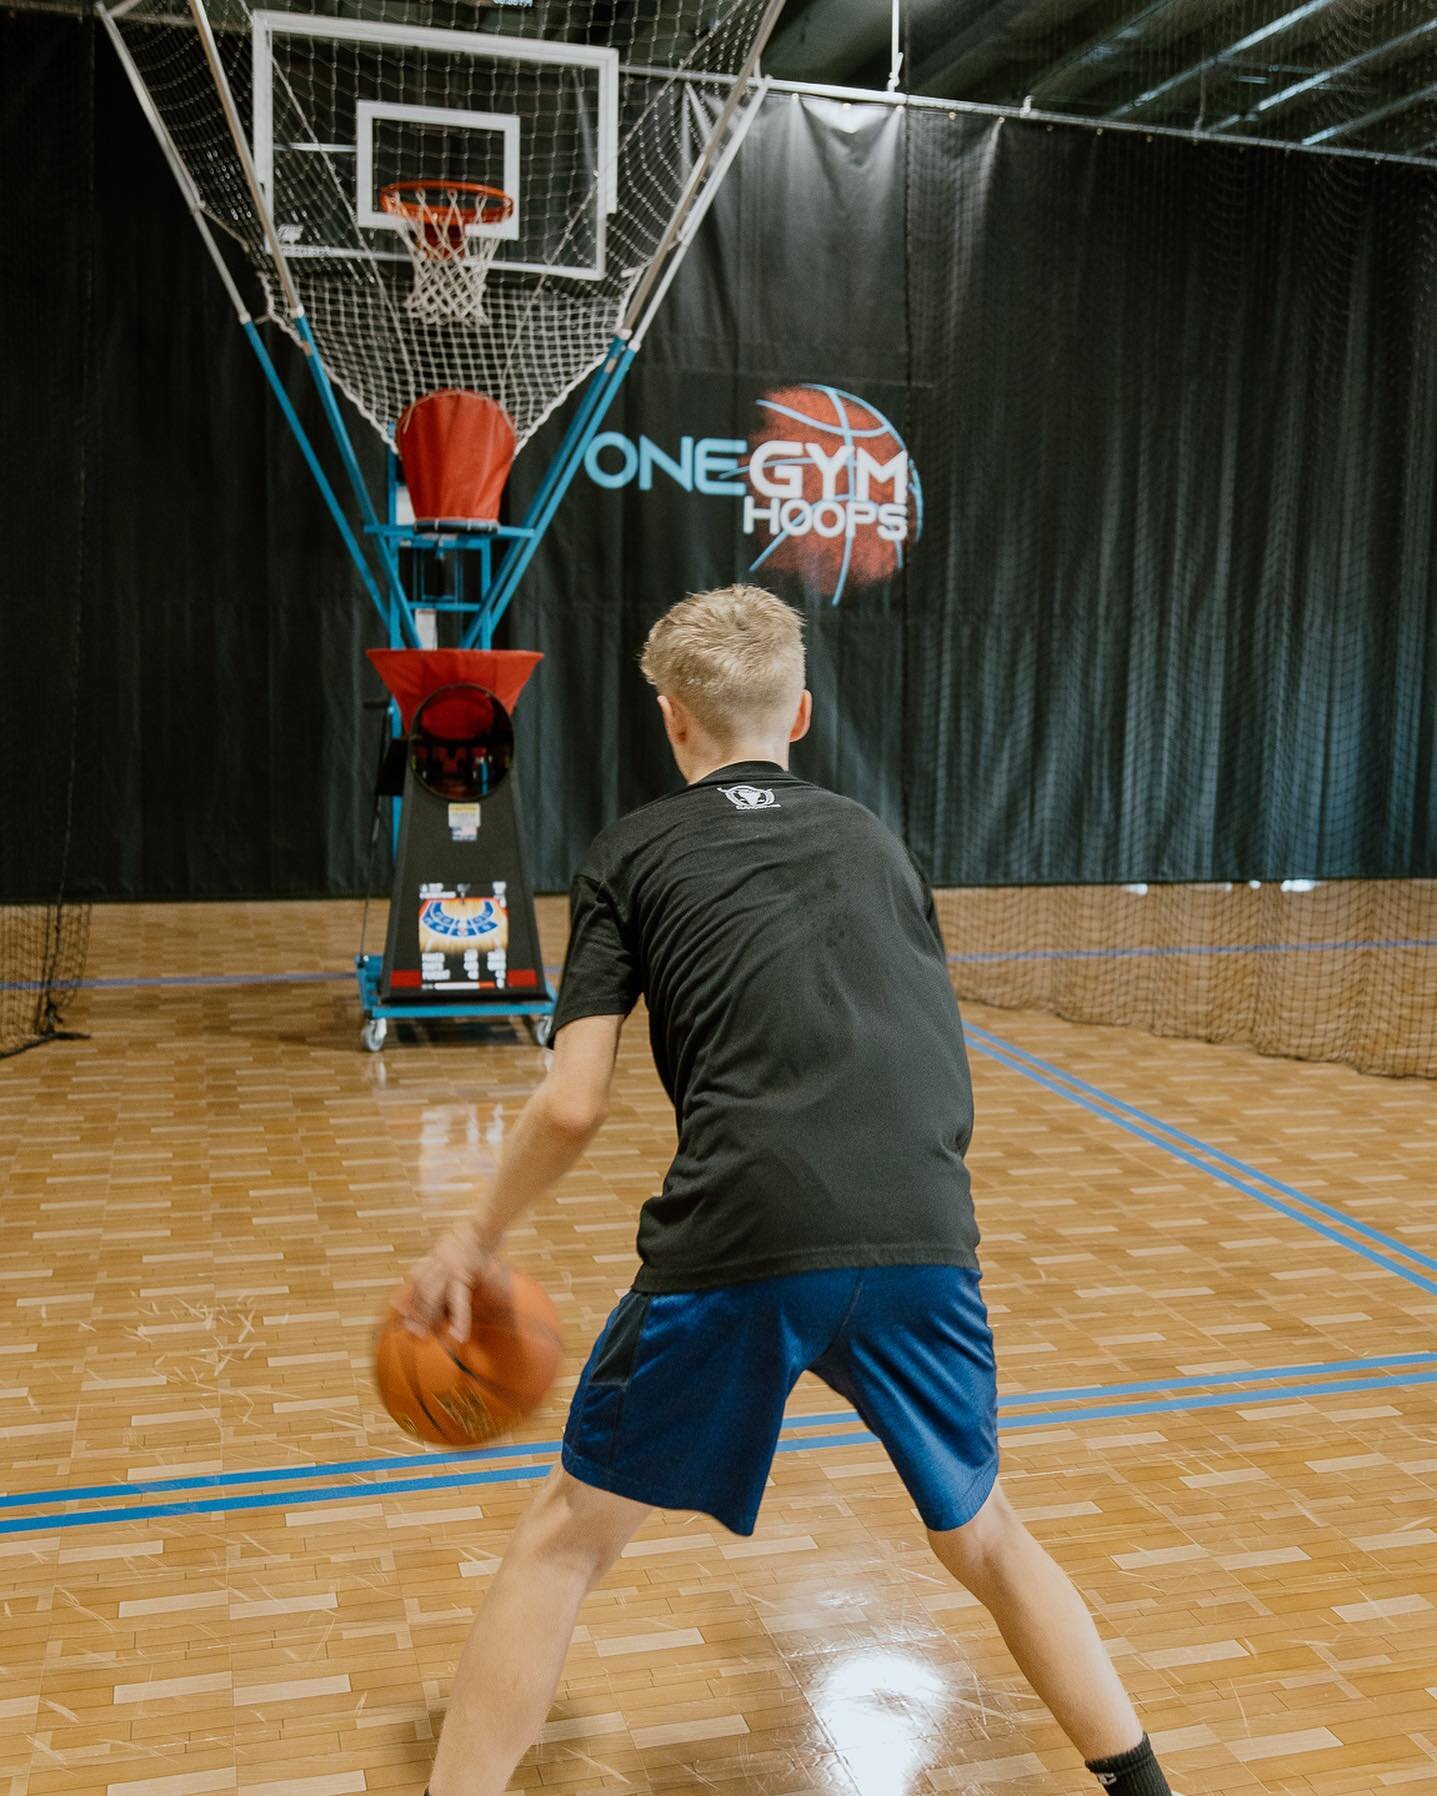 Schedule a time to come into our Omaha athletic training center and gym, and enjoy 

🚨1 FREE HALF HOUR SESSION🚨

 on one of our hoops. A staff member will walk you through how to use the shooting guns and get you started on your free basketball ski